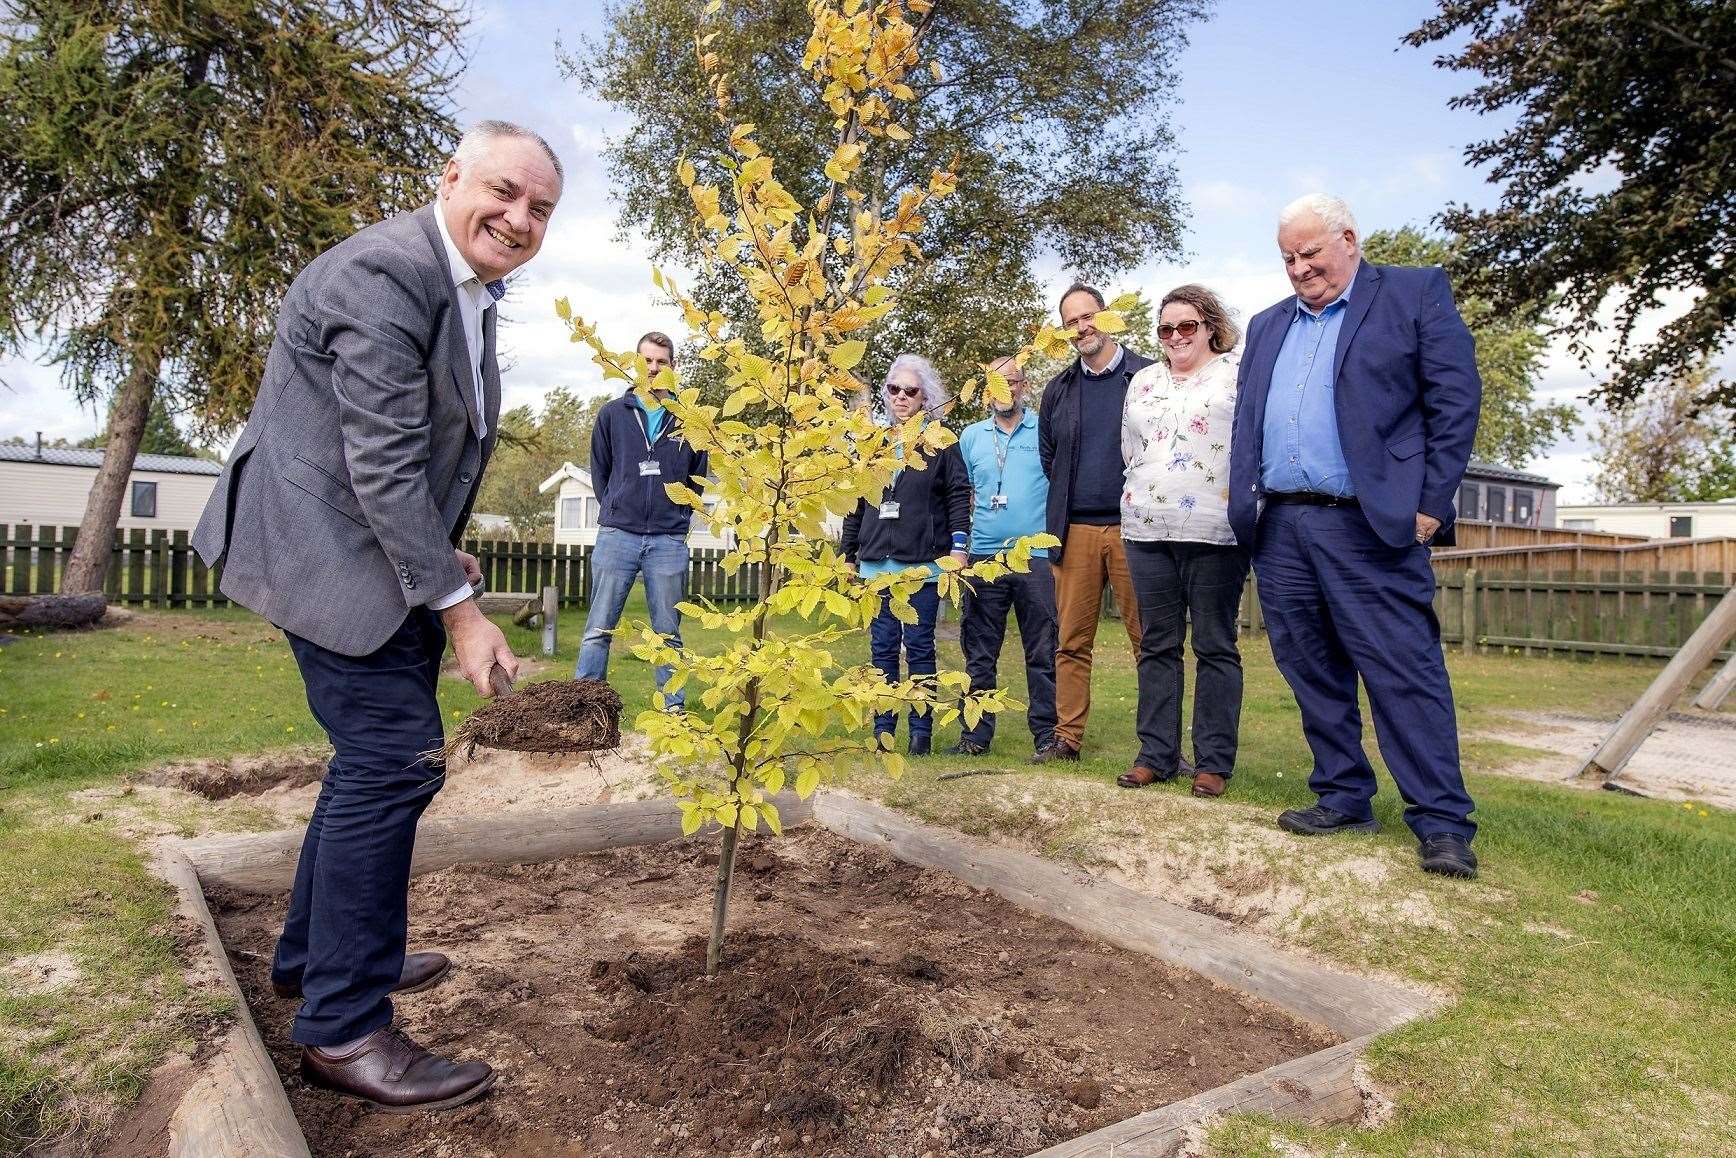 Scottish Tourism Minister Richard Lochhead MSP plants the commemorative hornbeam at the Findhorn park.